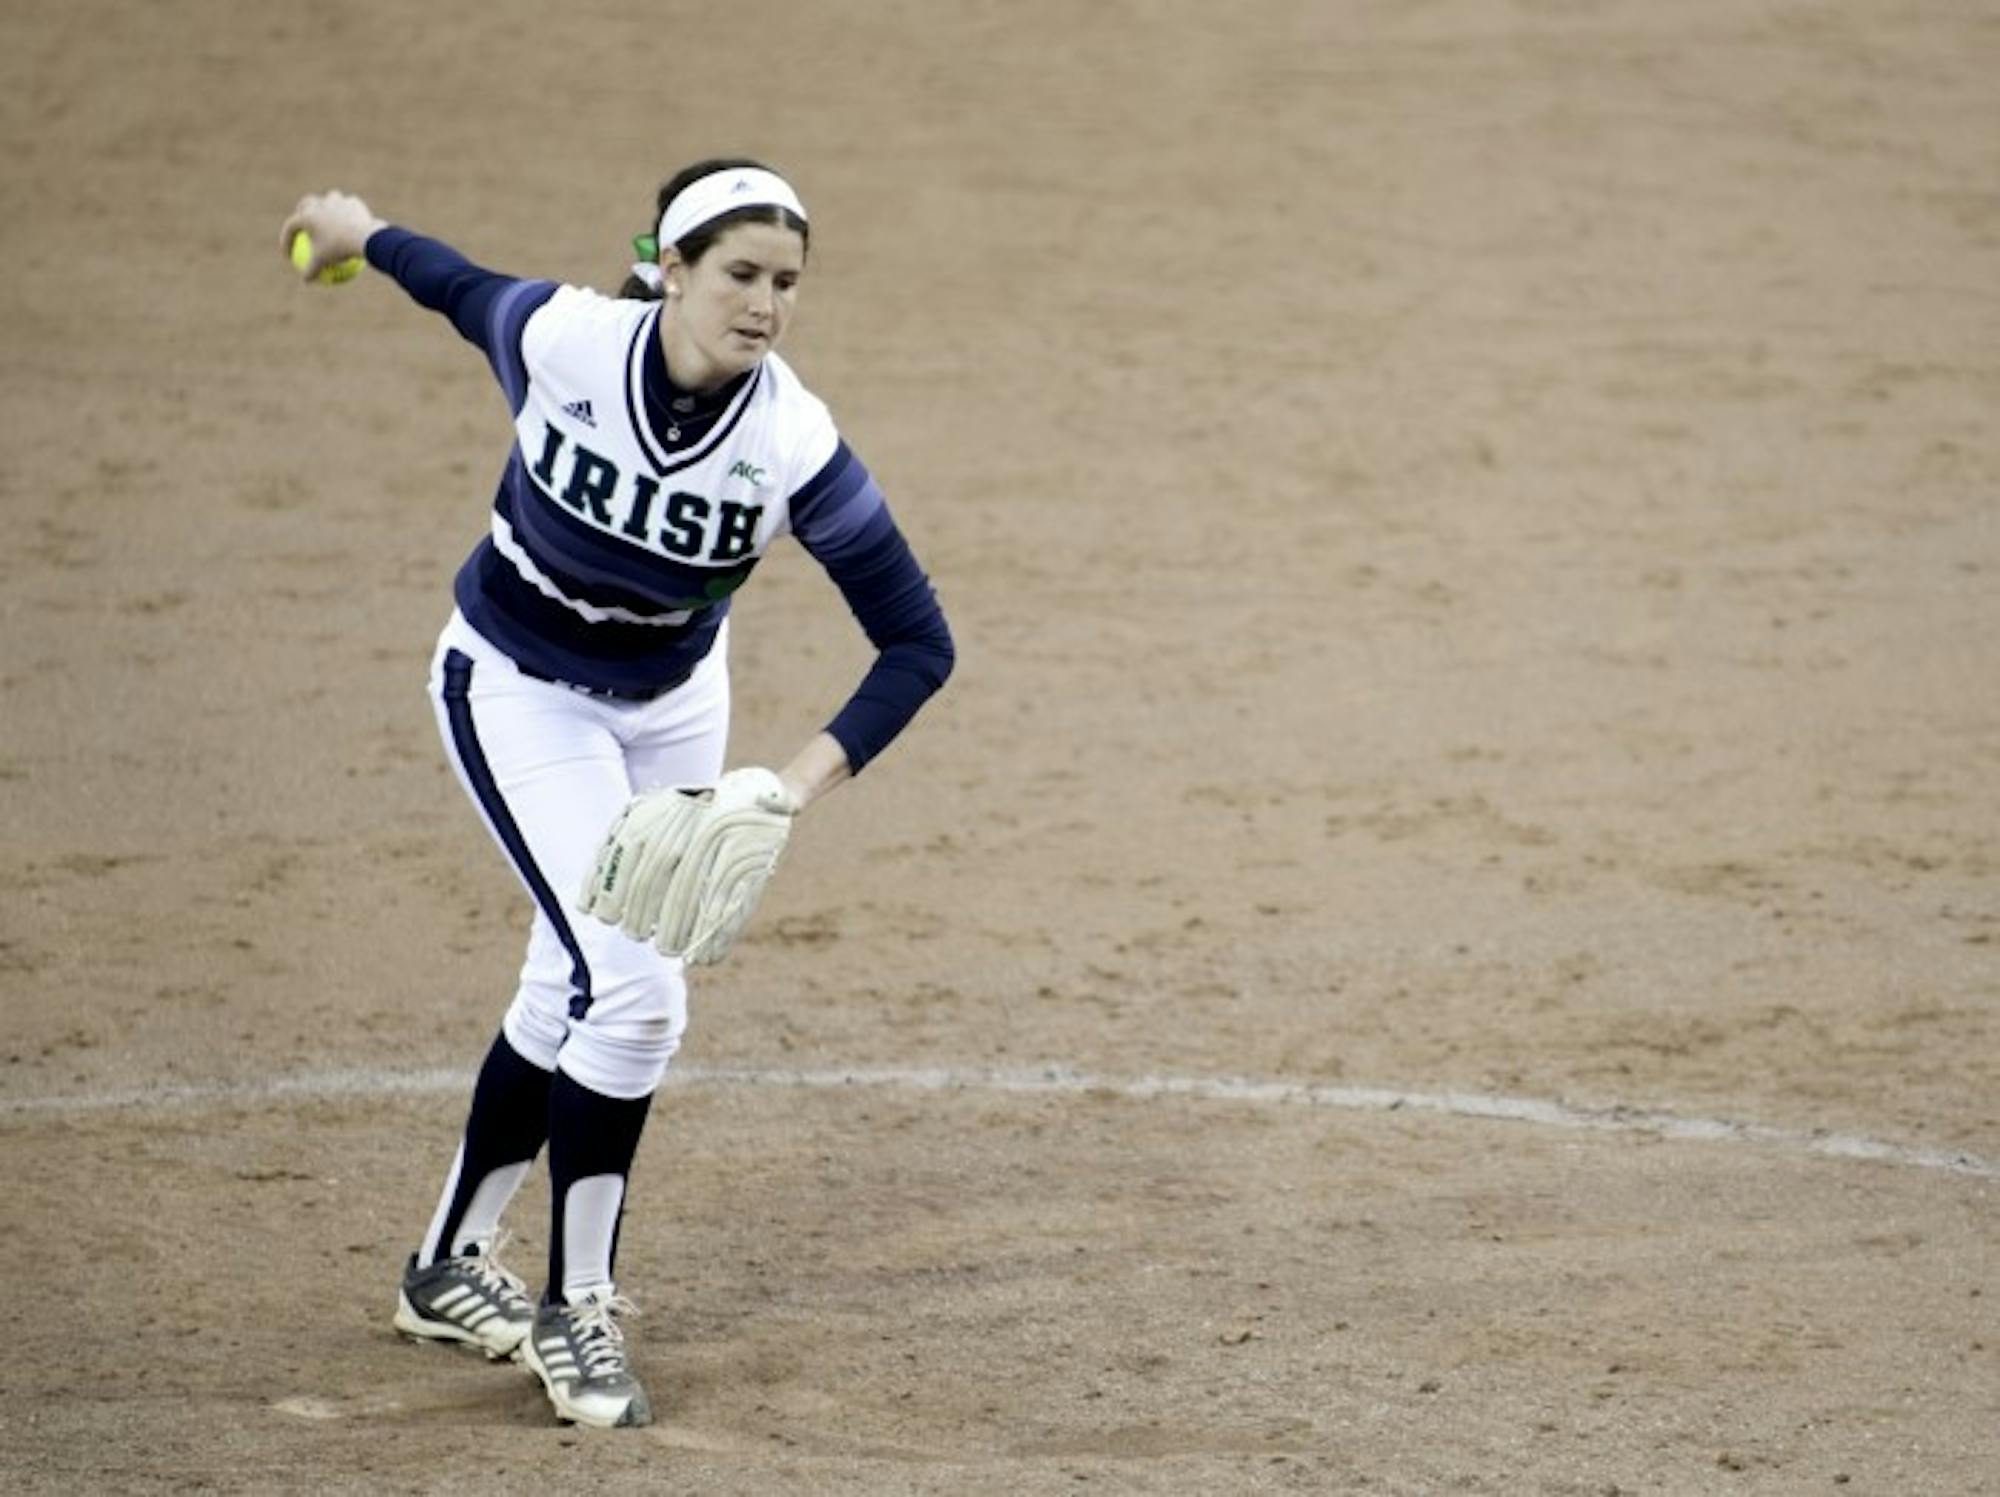 Irish sophomore pitcher Rachel Nasland winds up in Notre Dame’s 11-4 victory over Michigan State on April 2 at Melissa Cook Stadium.